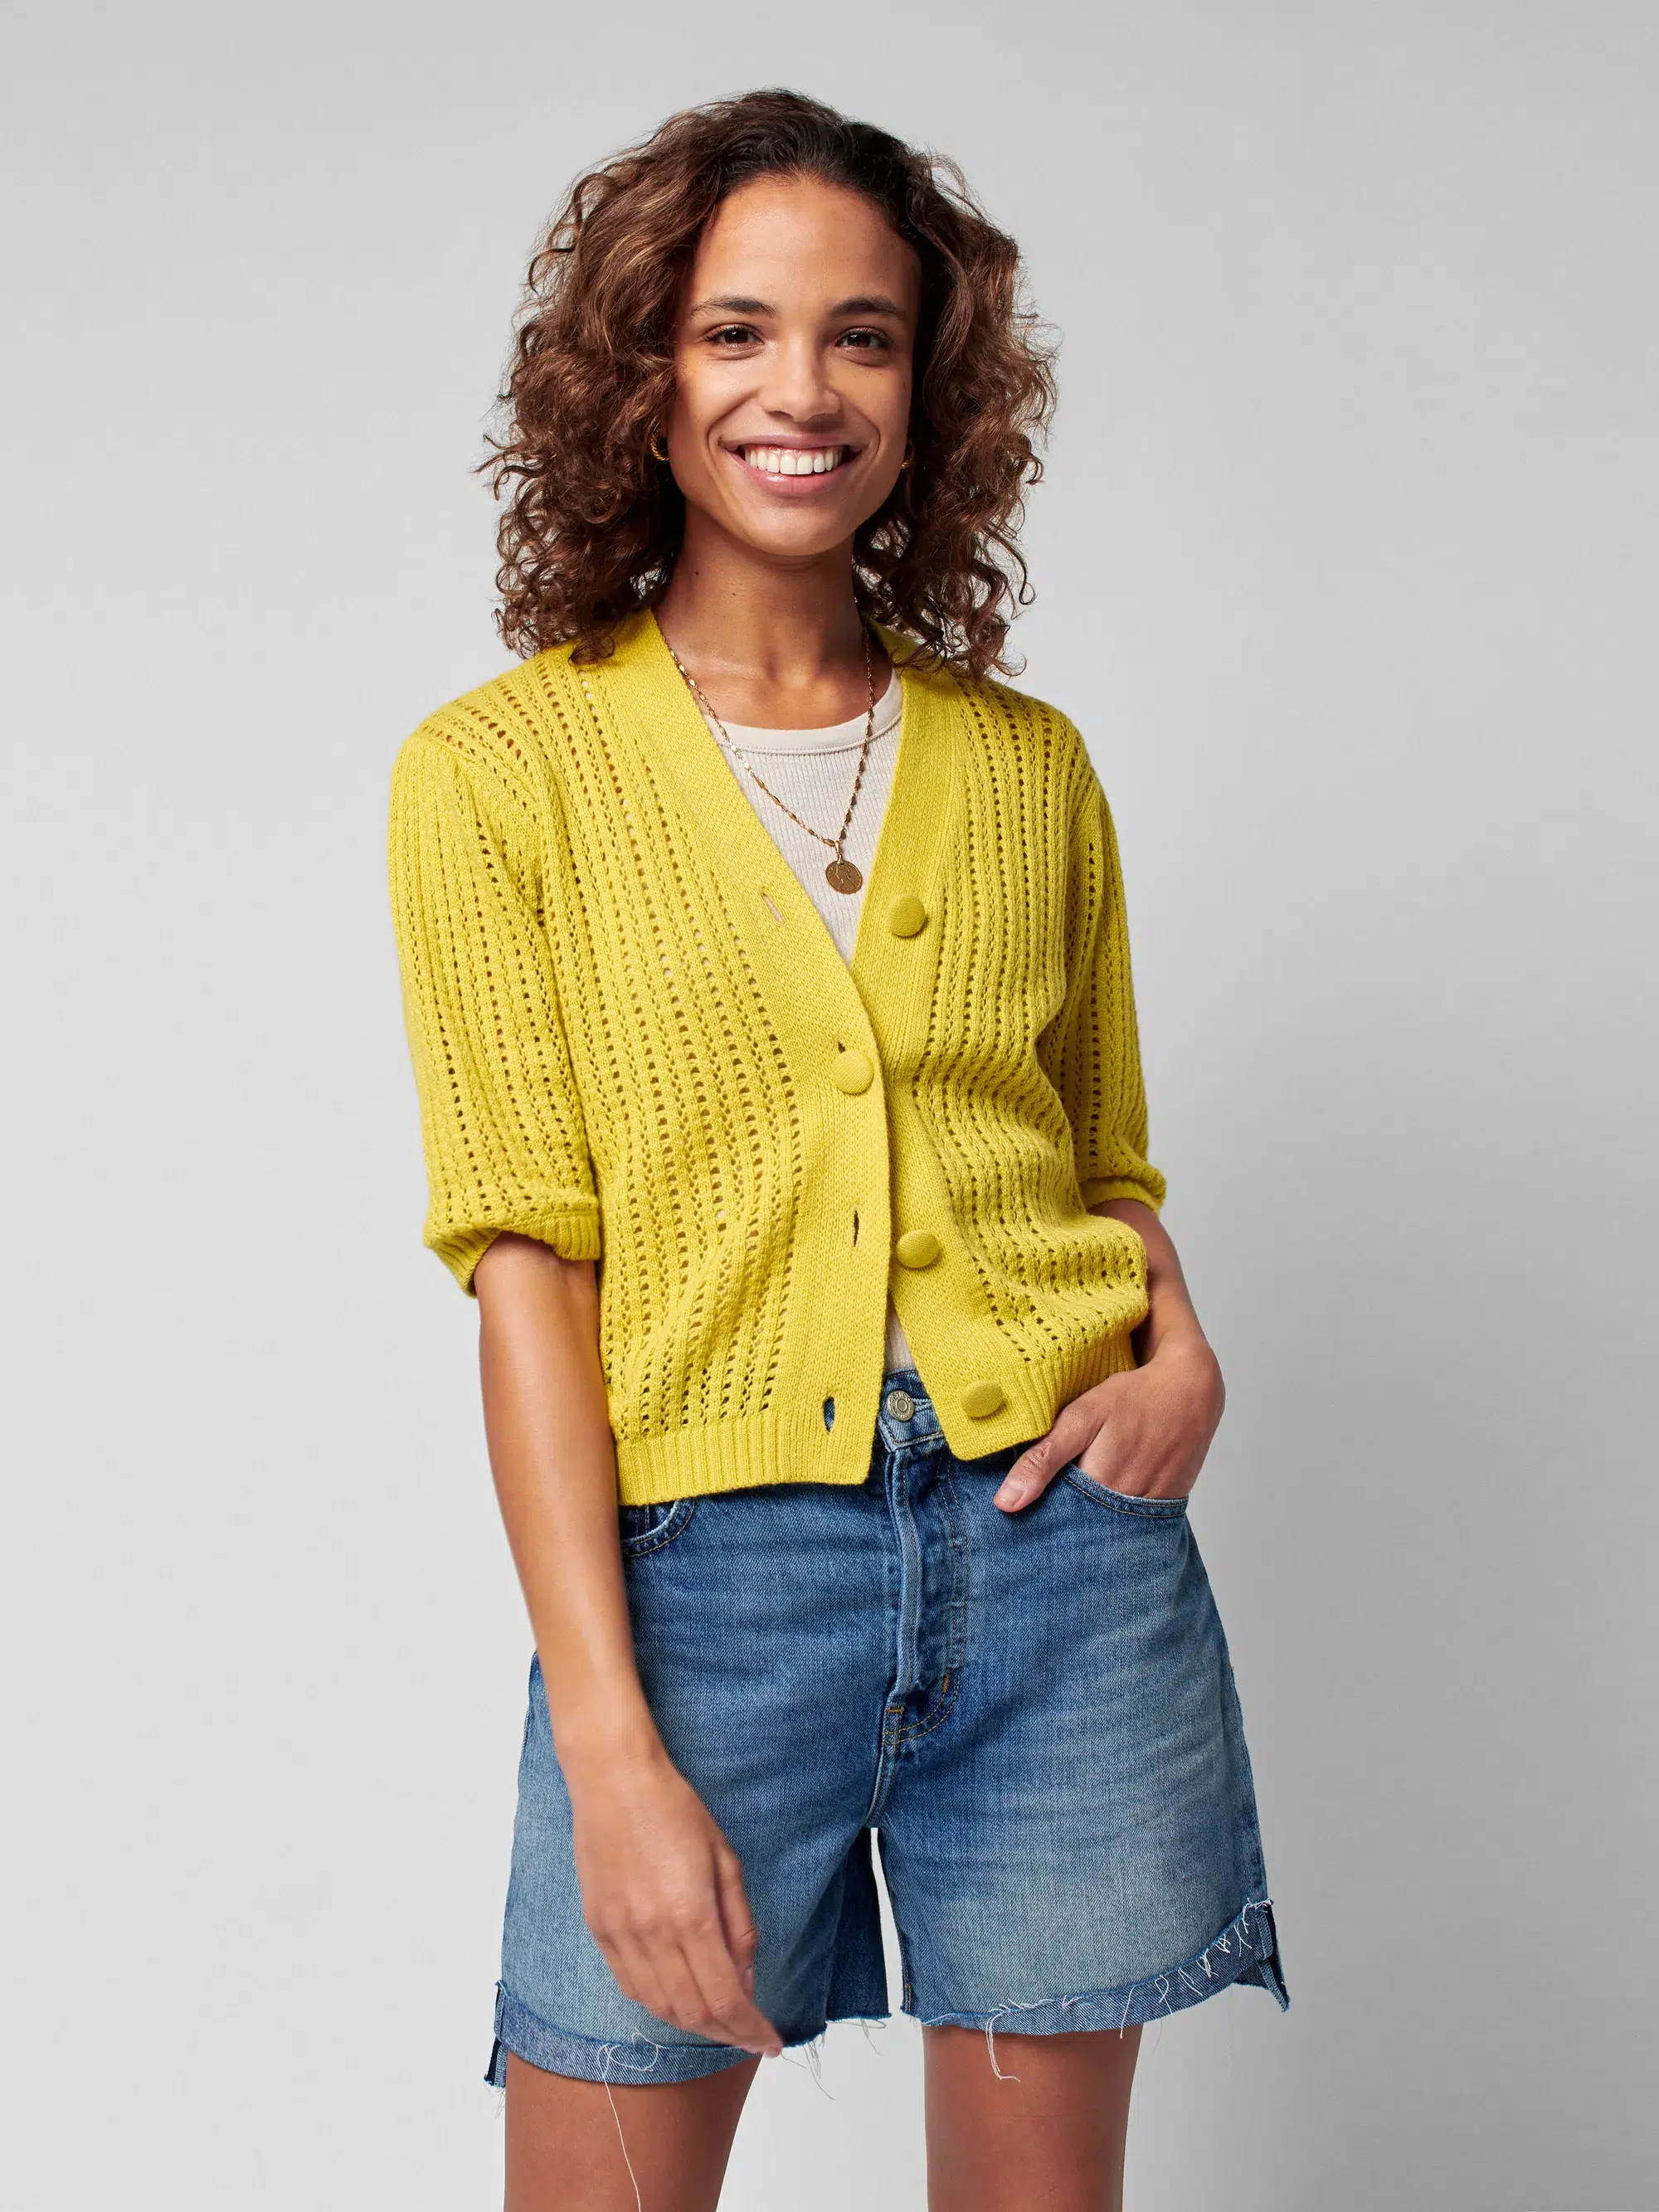 The 15 Best Yellow Cardigans to Reach For This Season